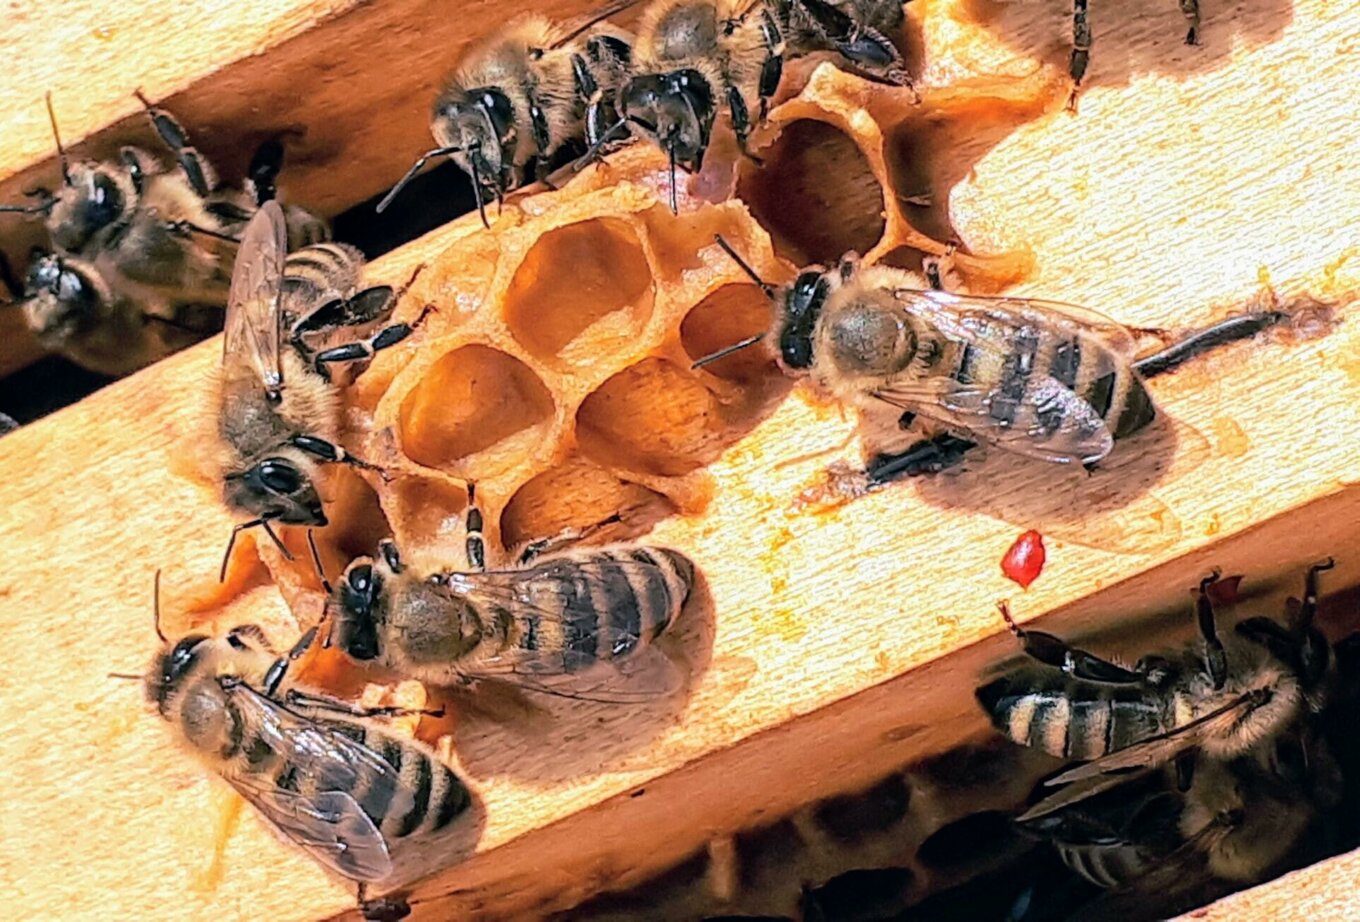 Bees with honeycomb